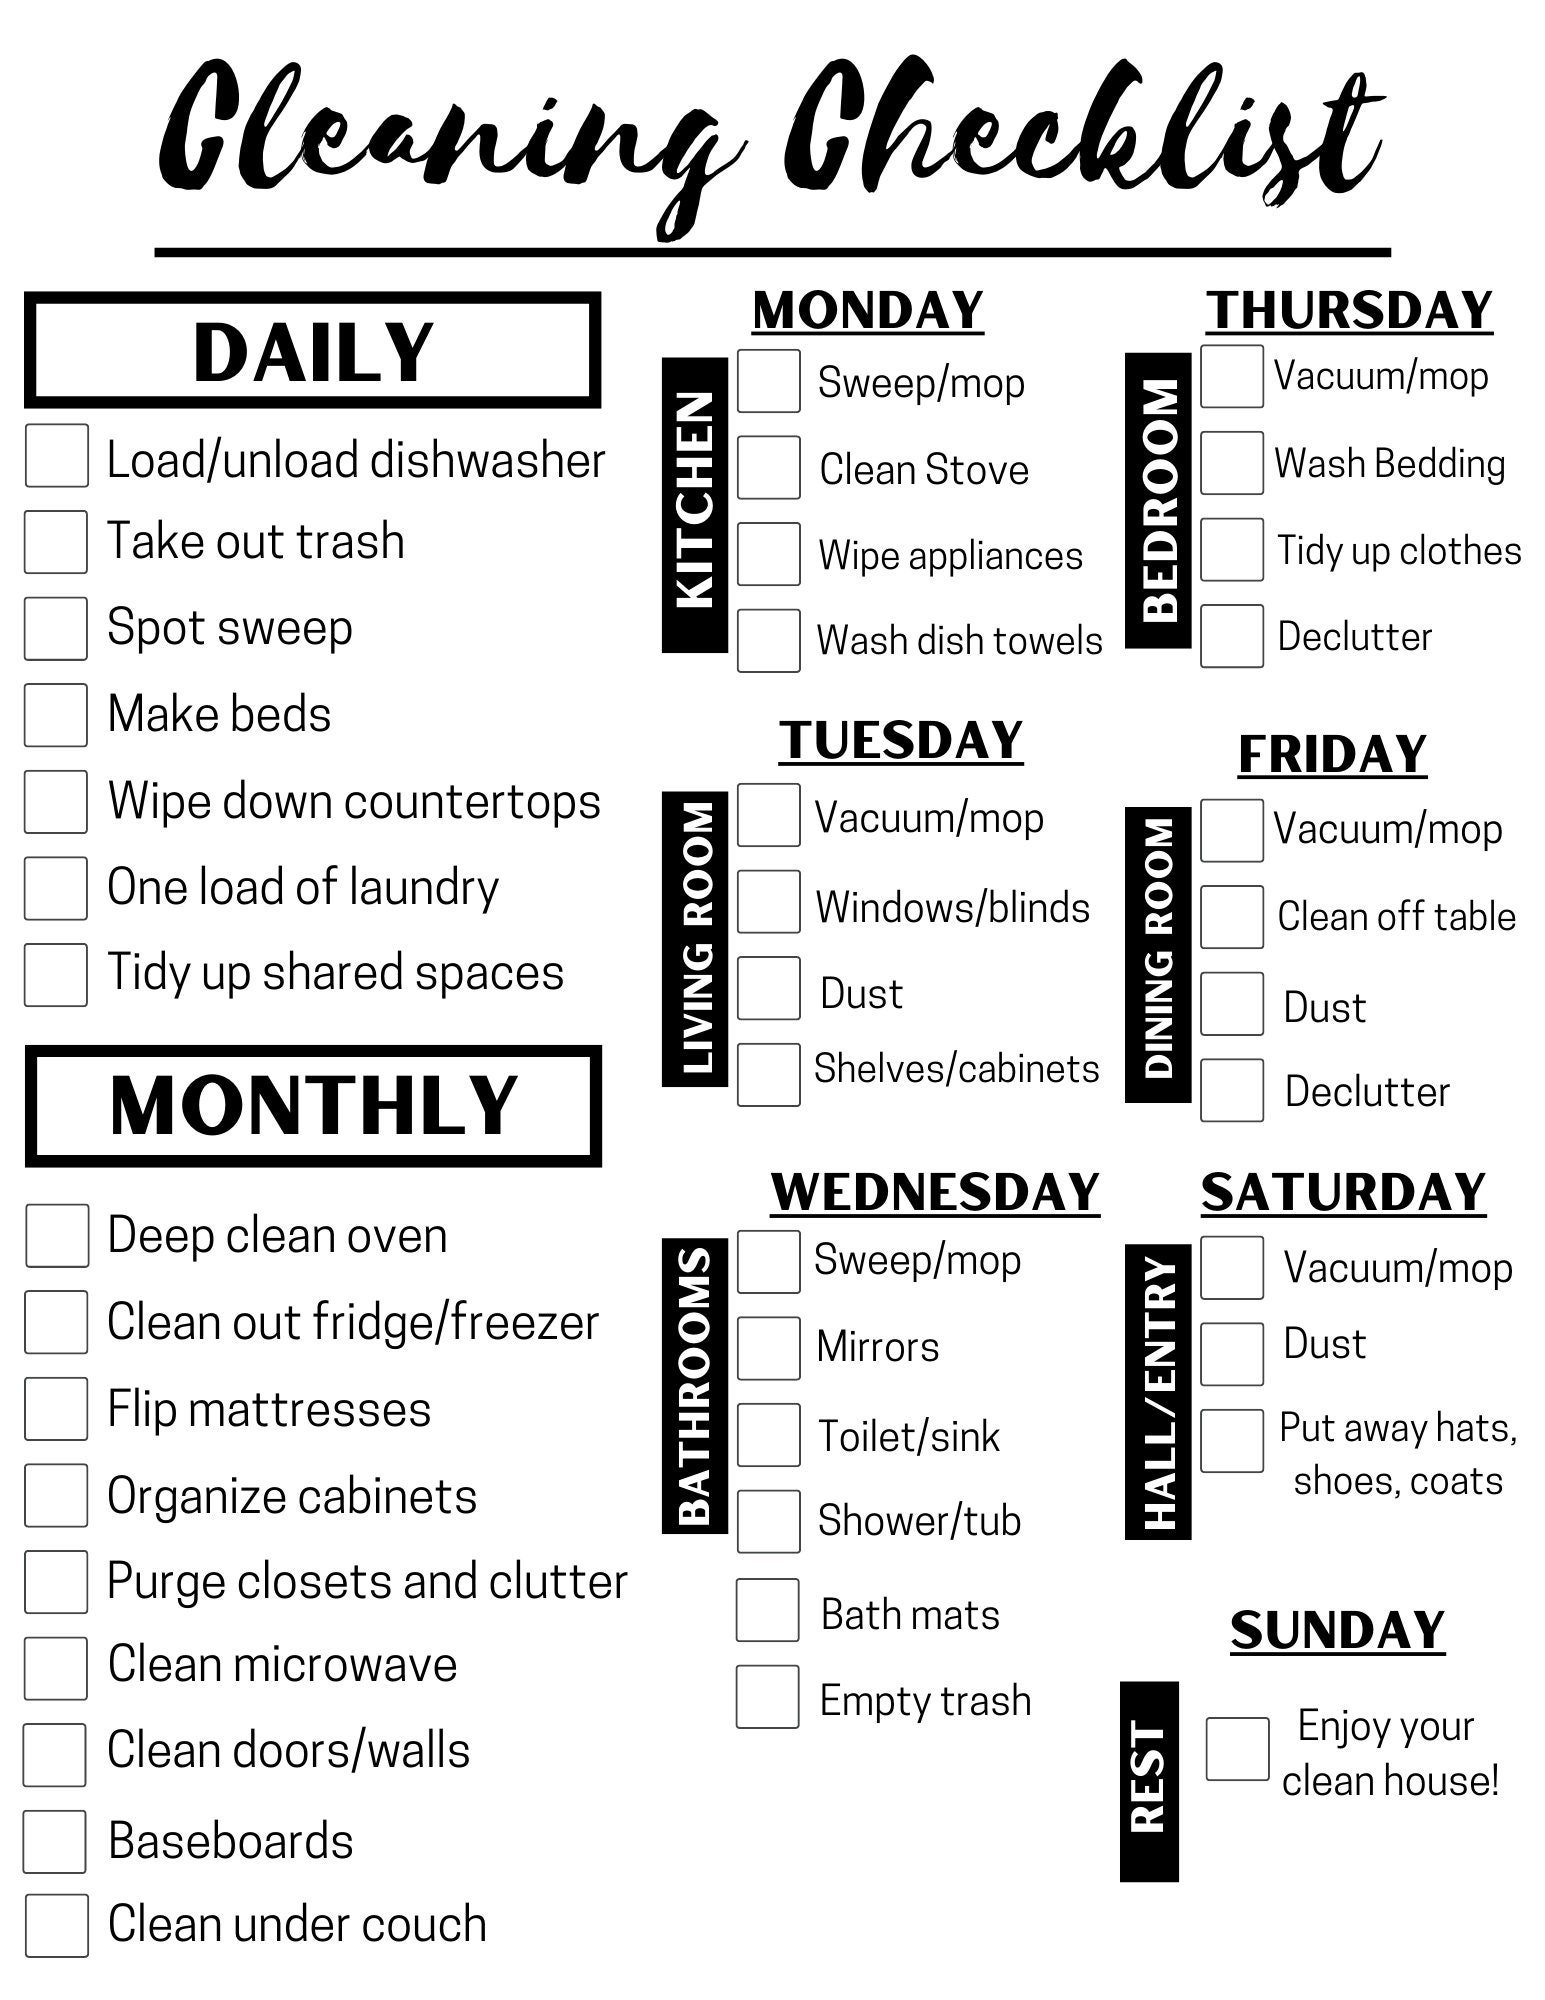 daily-weekly-monthly-cleaning-checklist-schedule-to-do-etsy